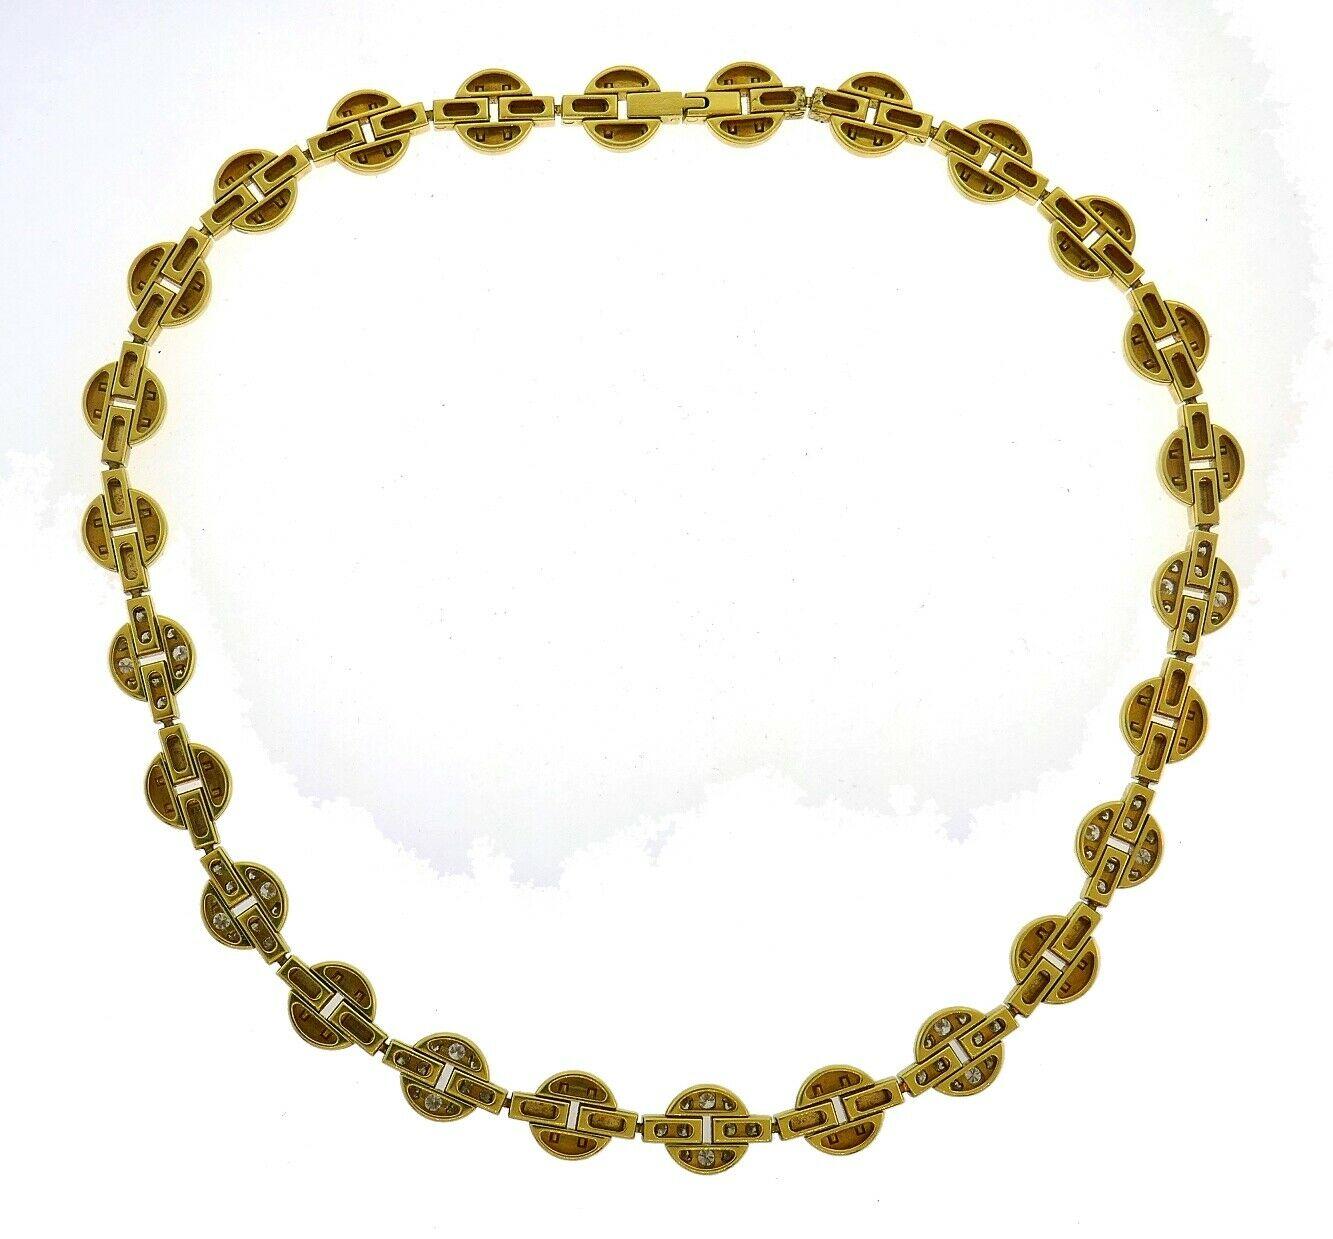 Cartier Himalia 18k Yellow Gold & Diamond Choker Necklace



Here is your chance to purchase a beautiful and highly collectible designer choker necklace. Truly a great piece at a great price! 



CARTIER Himalia 18 karat Yellow Gold Diamond